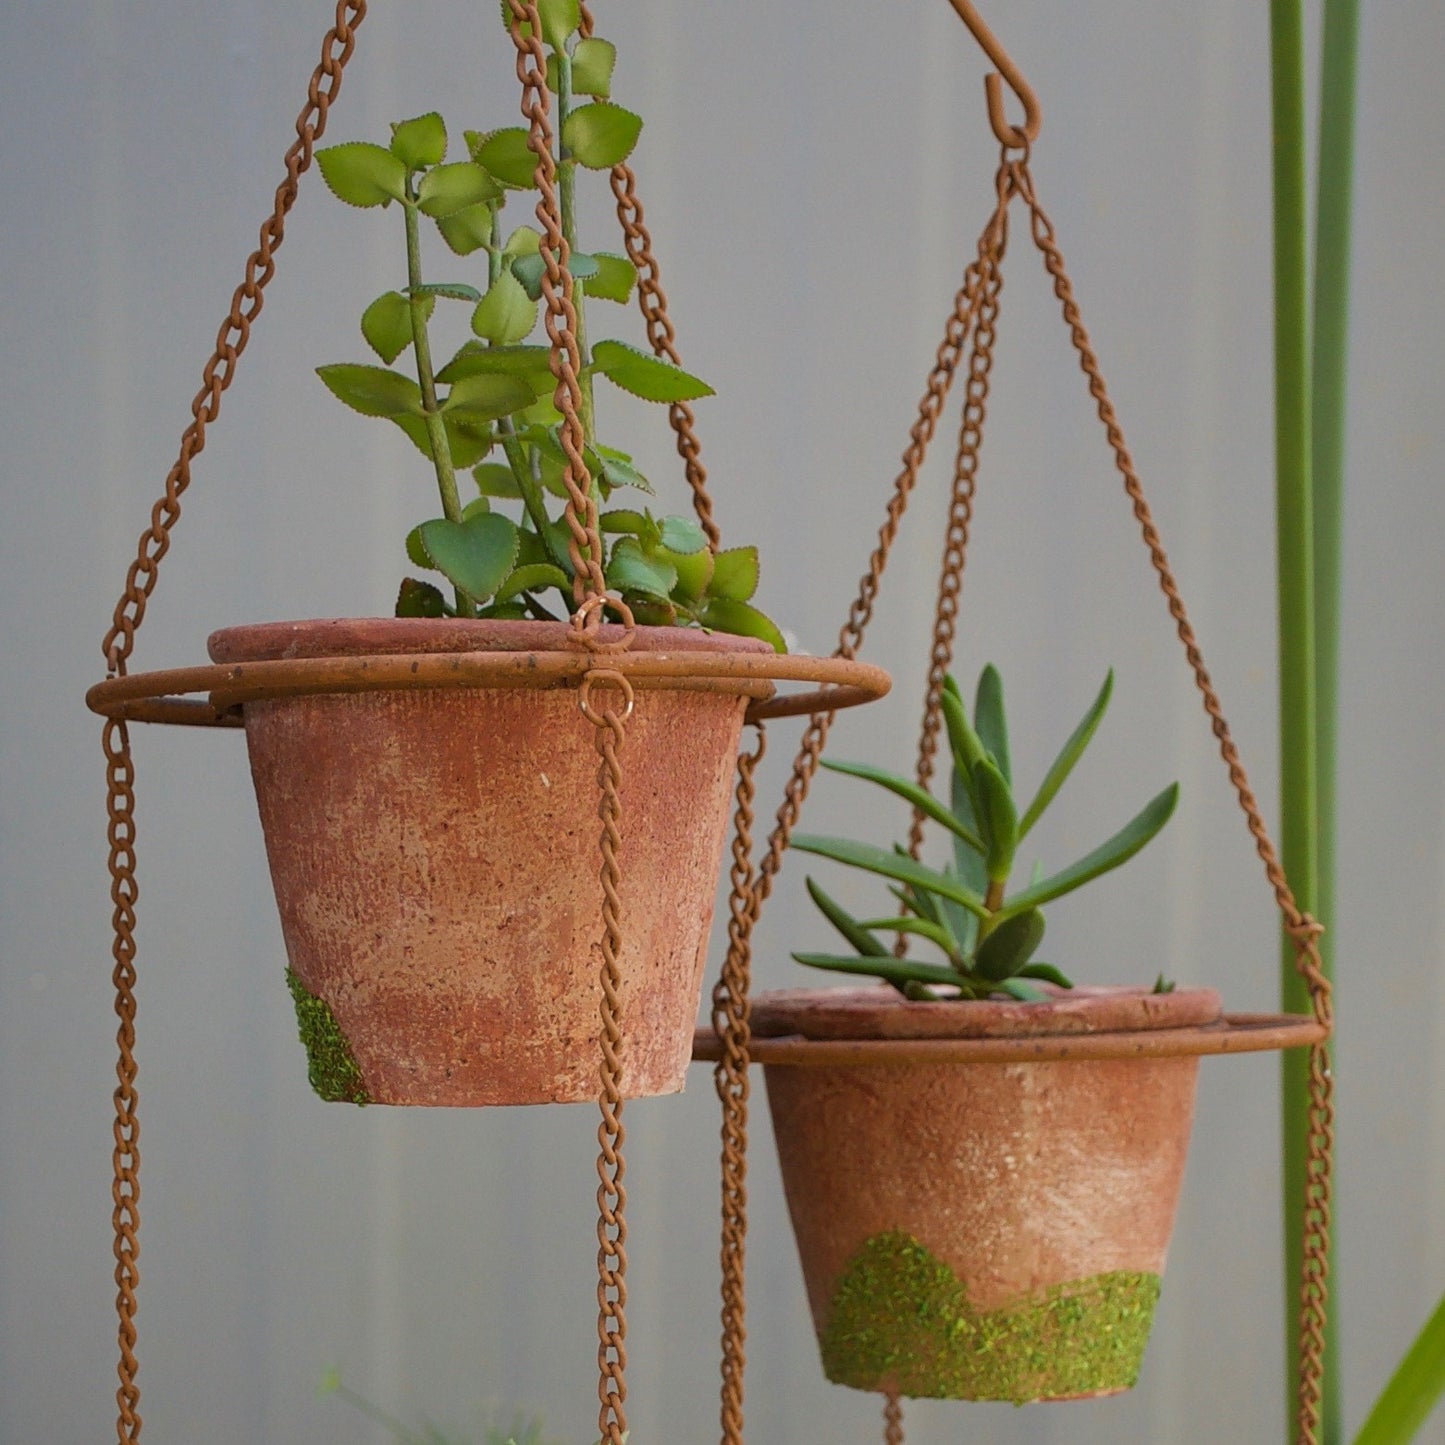 Small rustic terracotta pots with artificial moss